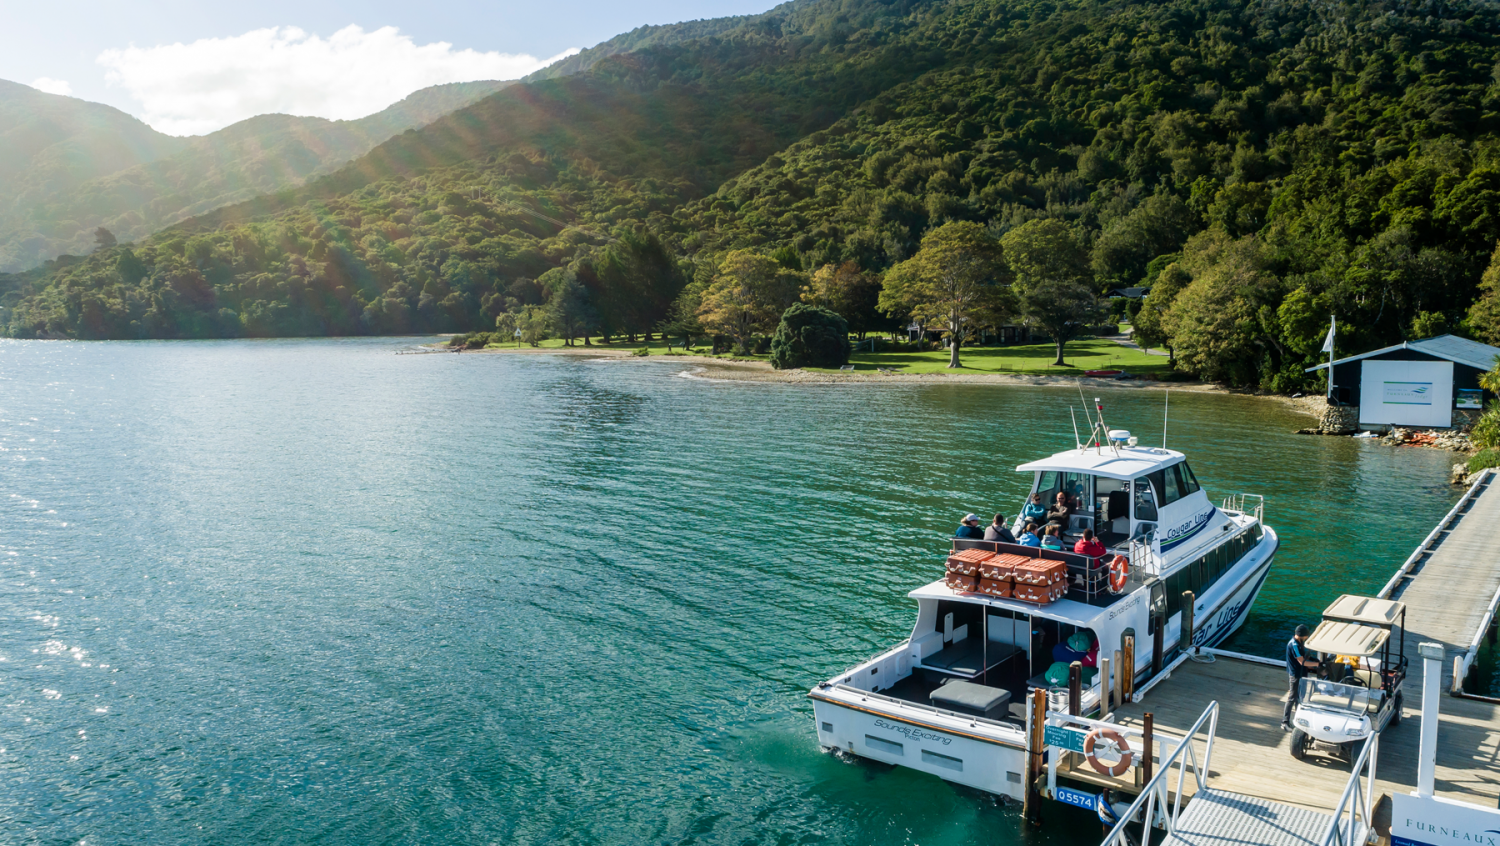 Image 1 for Queen Charlotte Sound Cruise to Furneaux Lodge